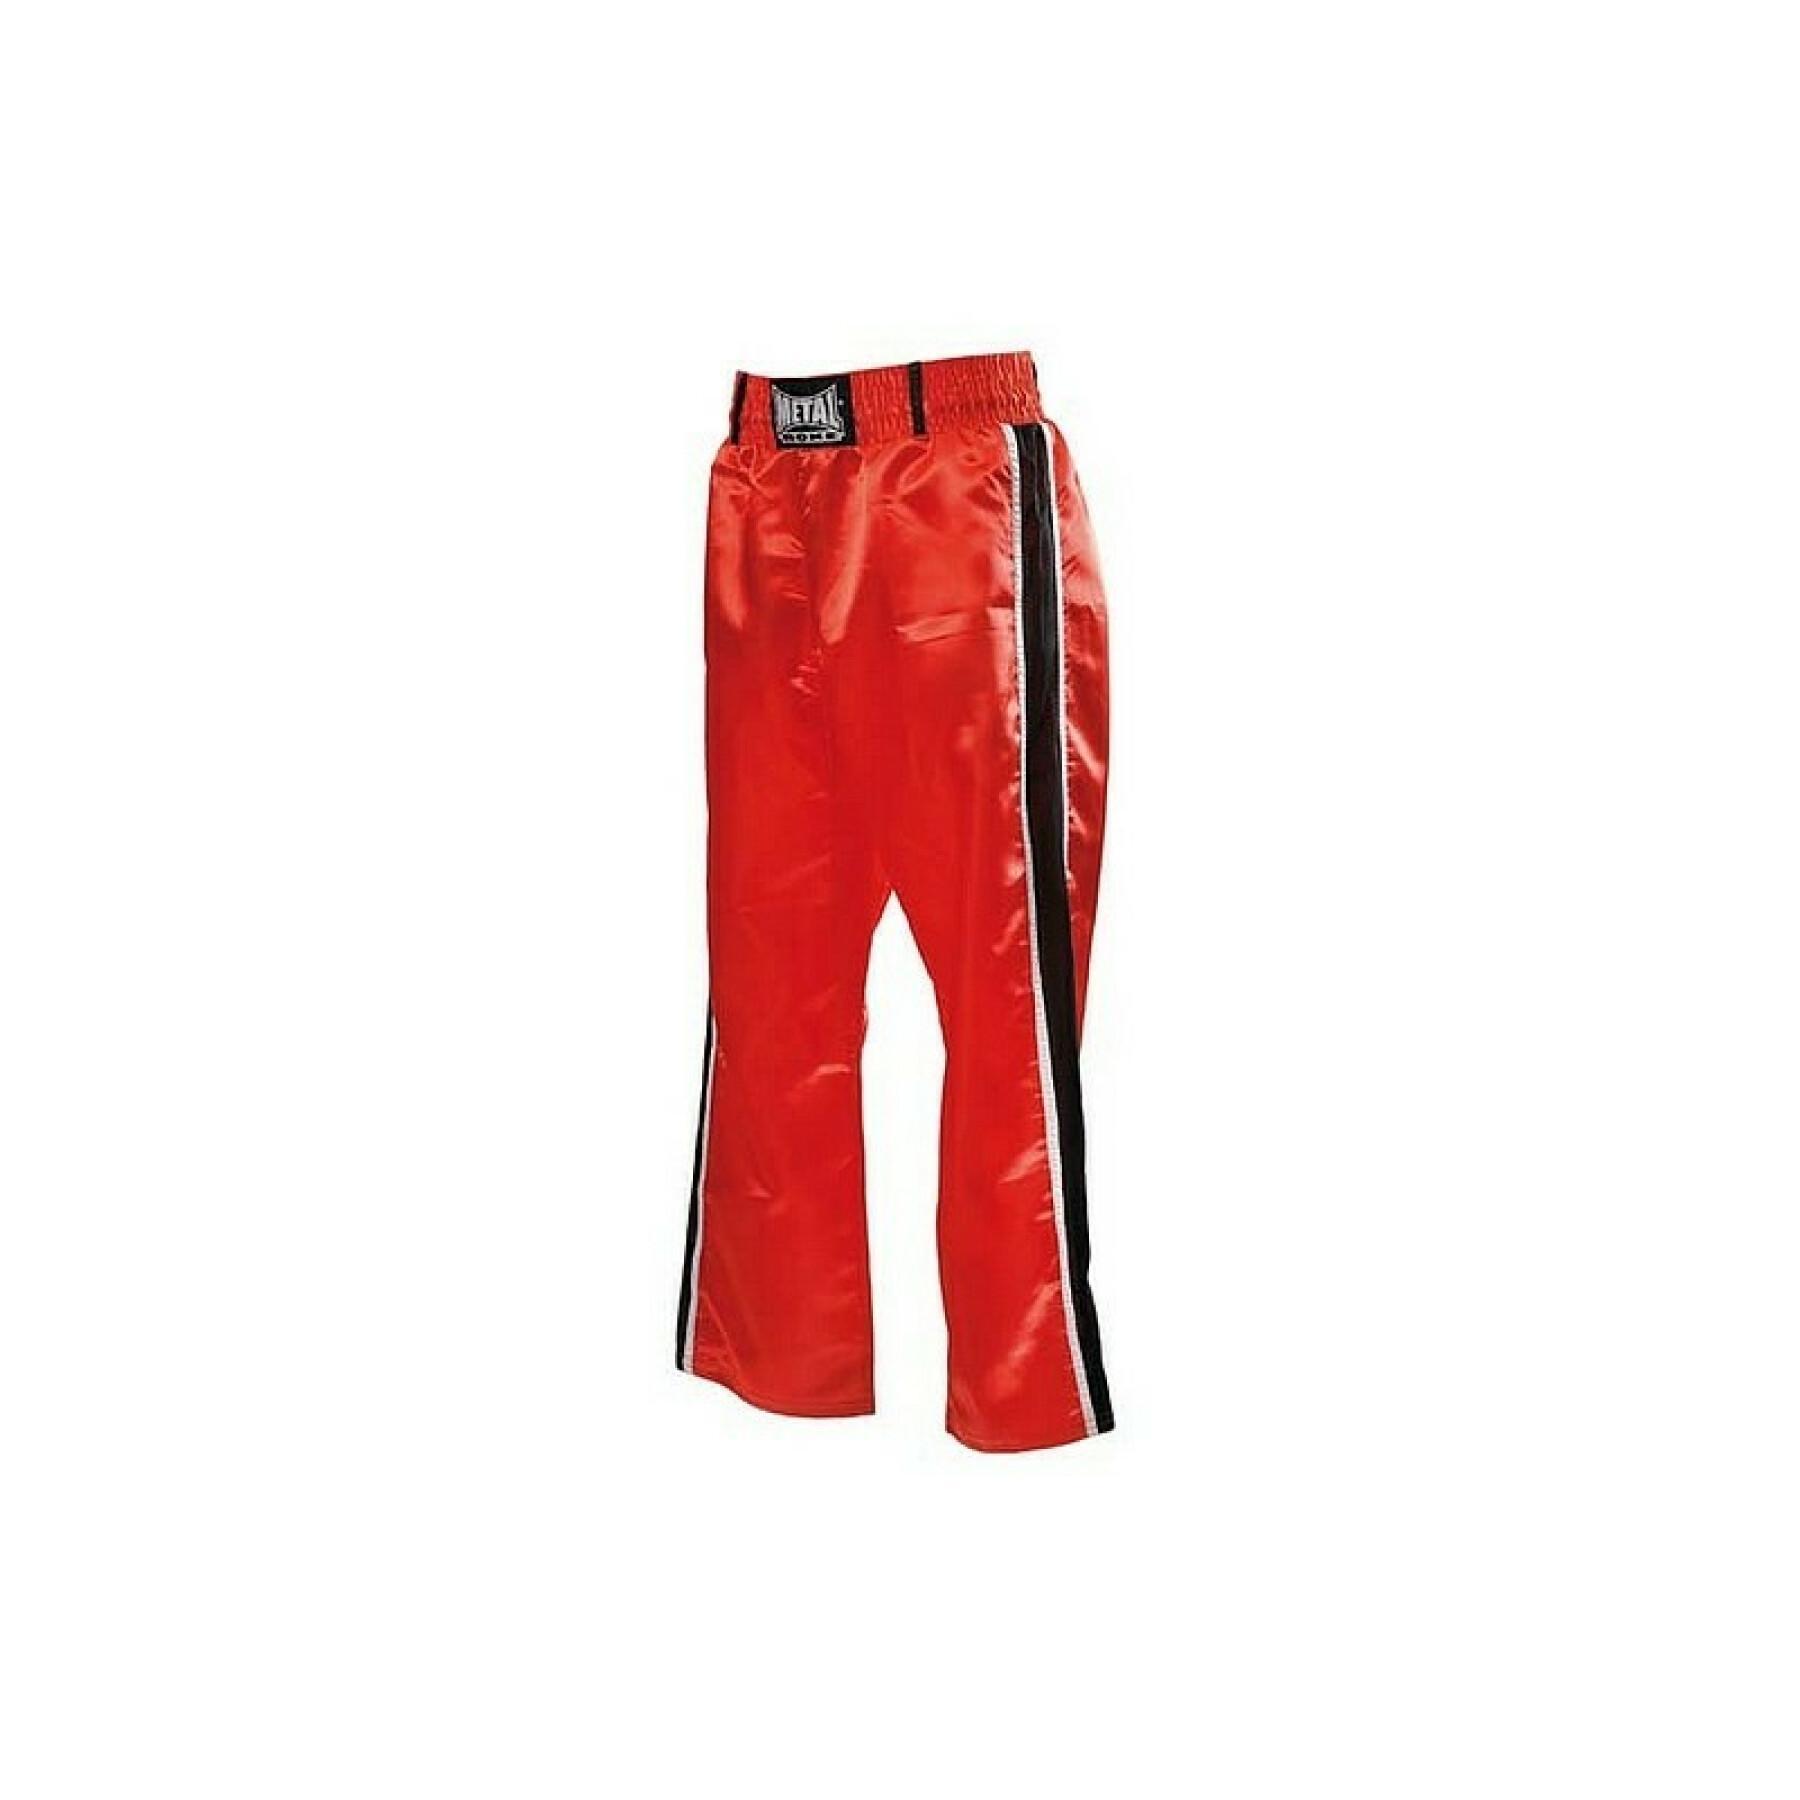 Joggers a 2 strisce nere Metal Boxe